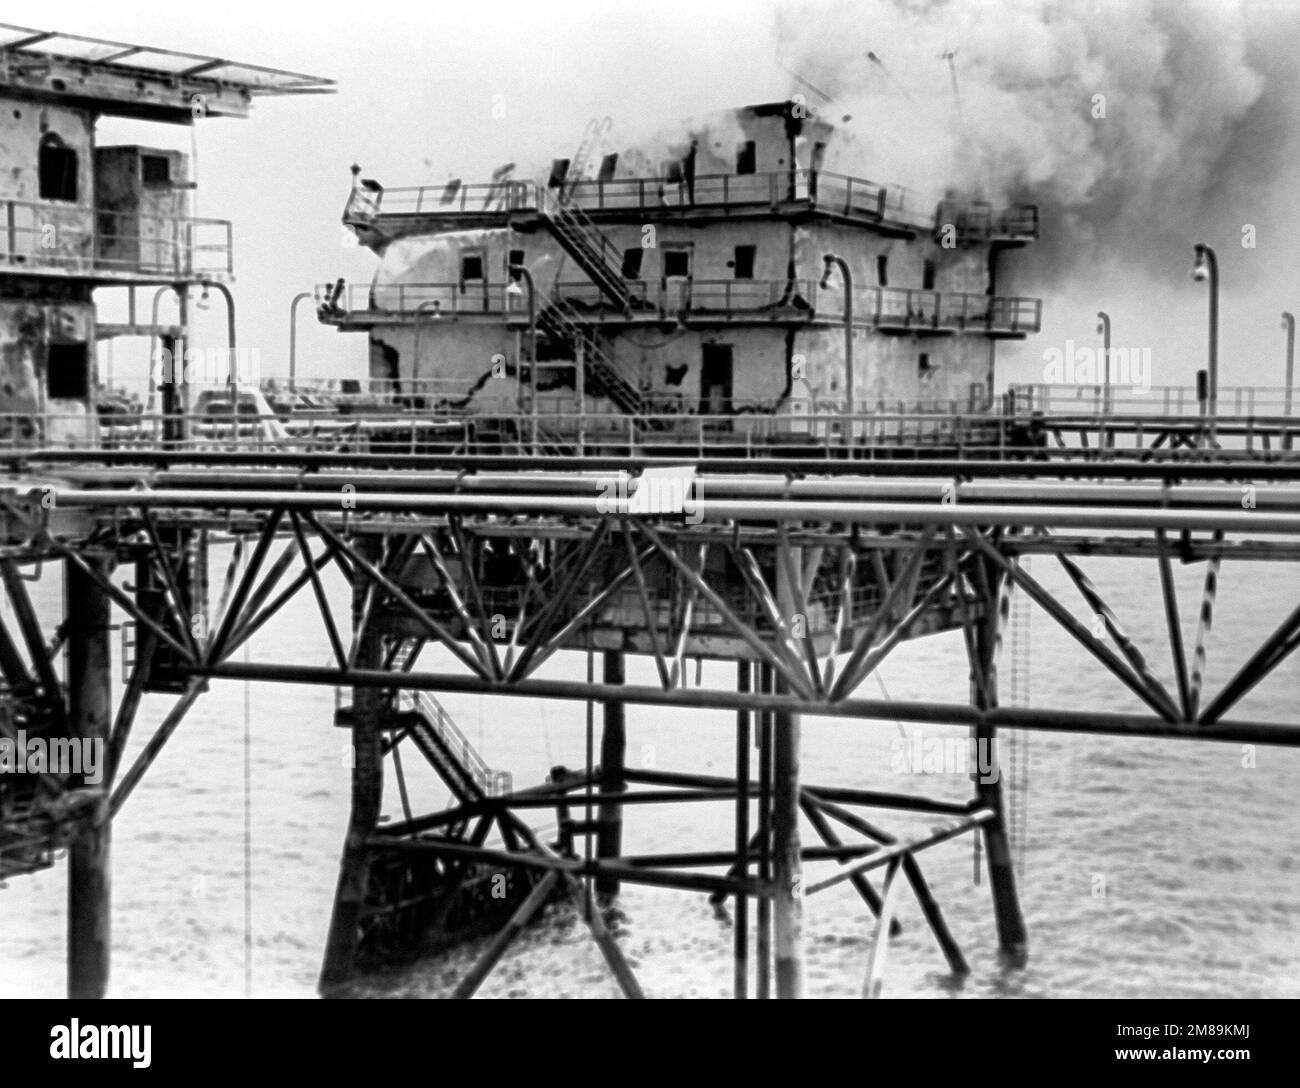 The main building of the Iranian Sassan oil platform burns after being hit by a BGM-71 Tube-launched, Optically-tracked, Wire-guided (TOW) missile fired from a Marine AH-1 Cobra helicopter. The attack was part of Operation Praying Mantis which was launched after the guided missile frigate USS SAMUEL B. ROBERTS (FFG-58) struck an Iranian mine on April 14, 1988. Subject Operation/Series: PRAYING MANTIS Country: Unknown Stock Photo